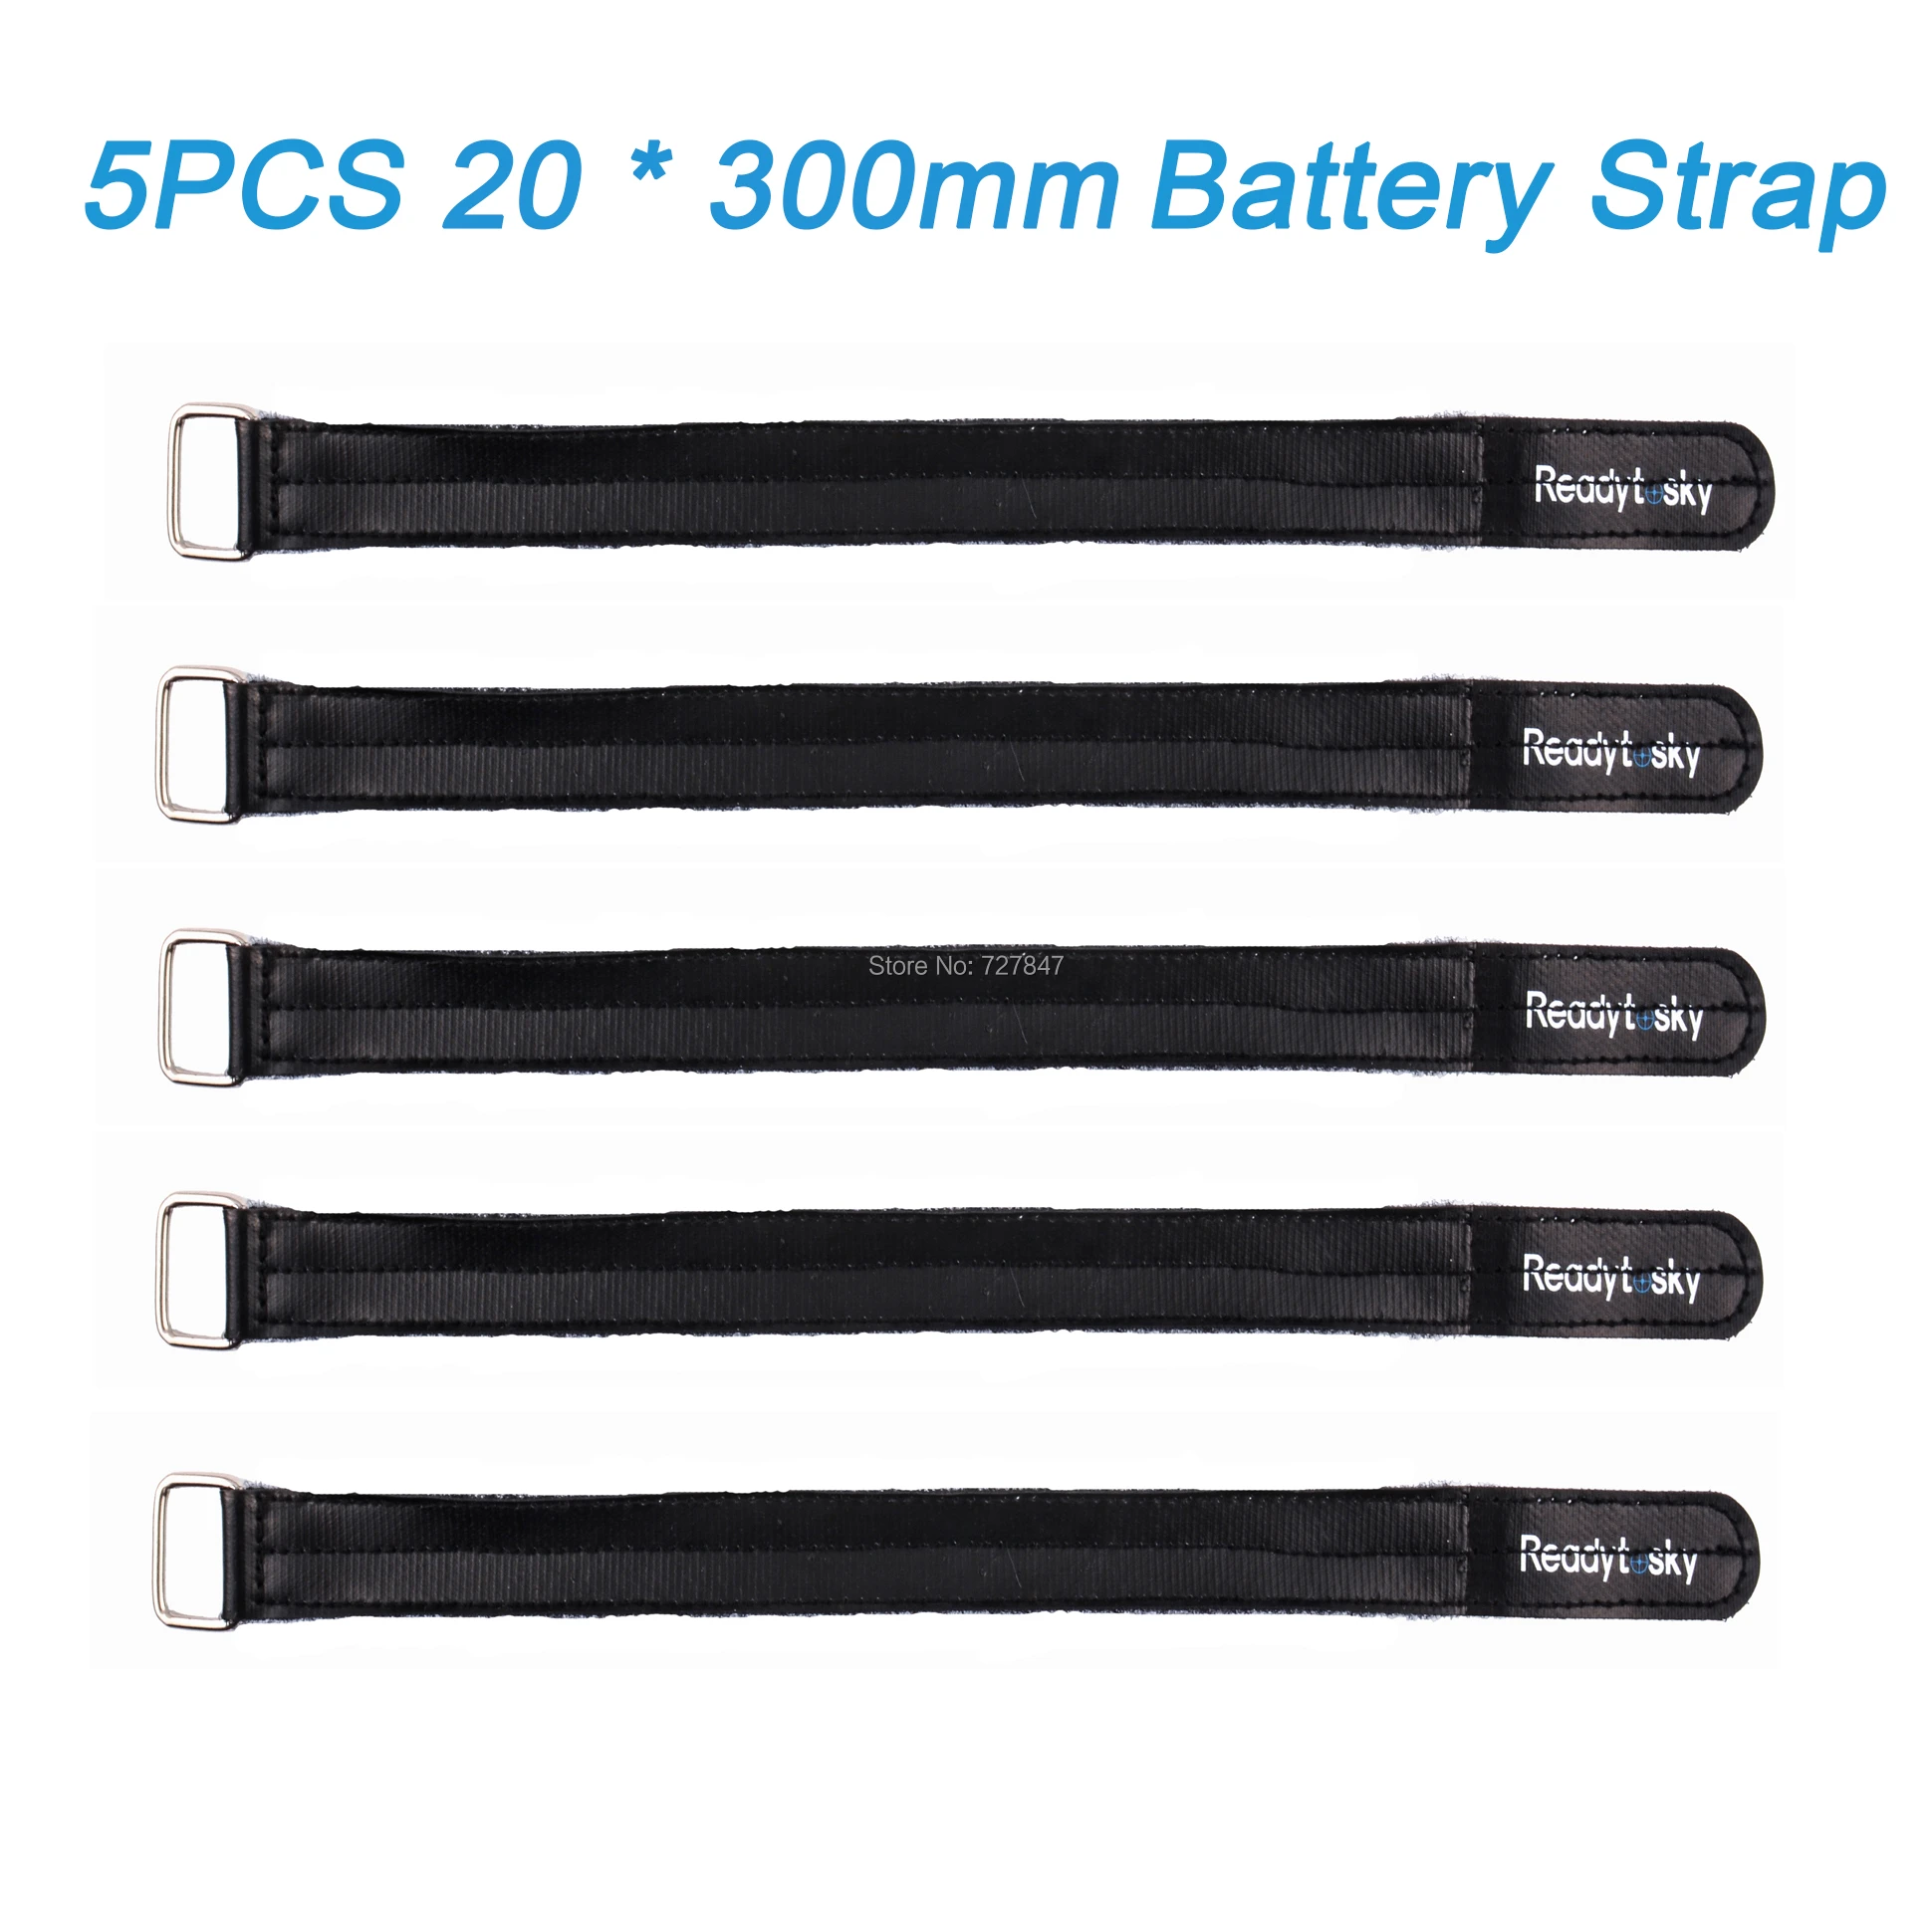 5PCS Update 20*300mm Black Magic Camera Lipo Battery Strap Buckle For RC Drone